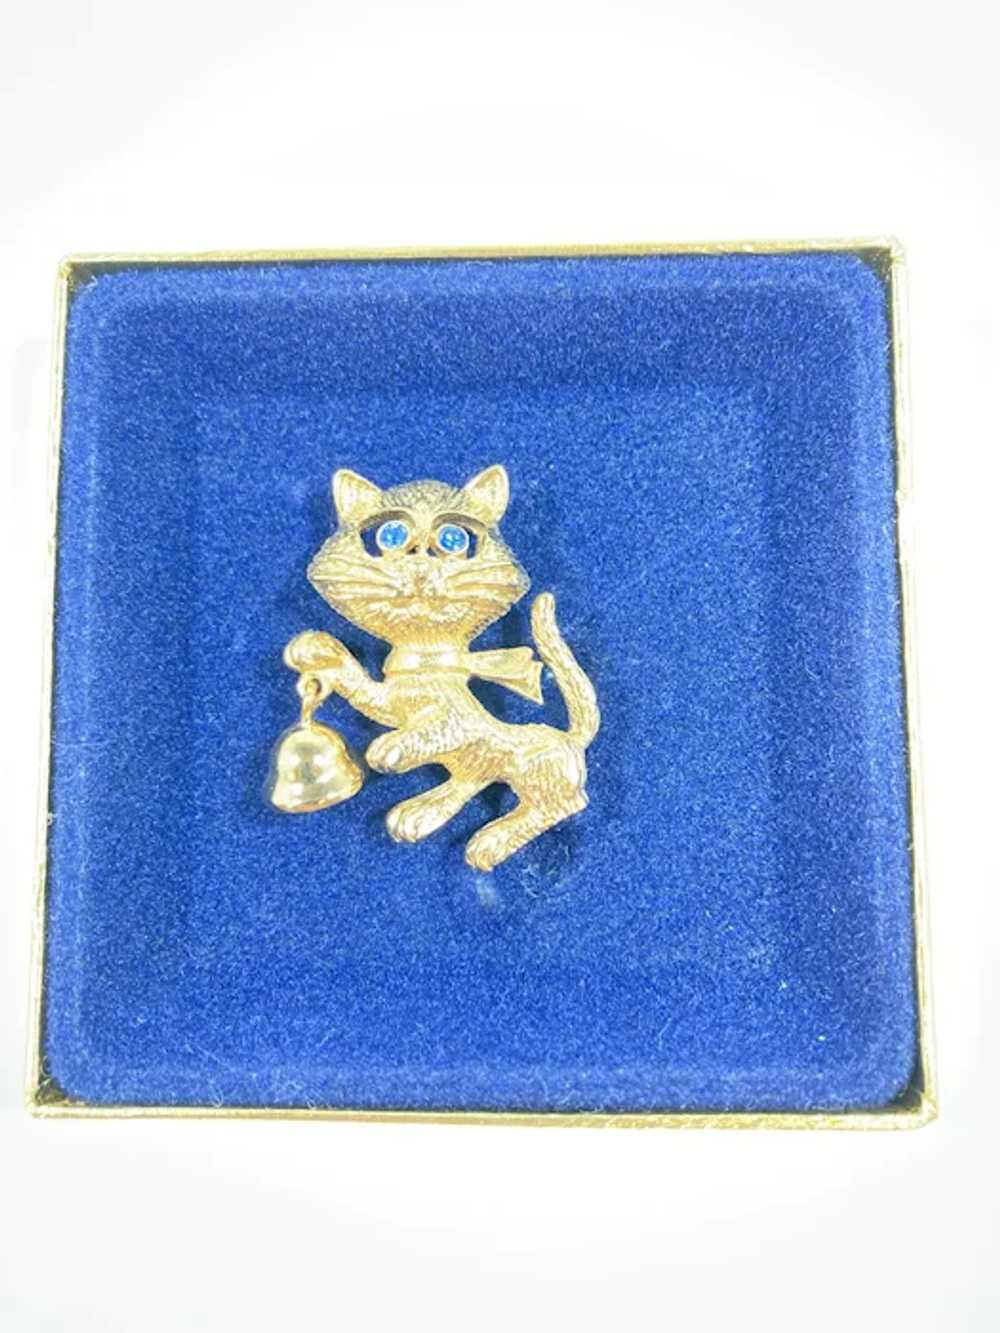 Avon Frisky Kitty Pin with Dangle Bell  Mint in O… - image 7